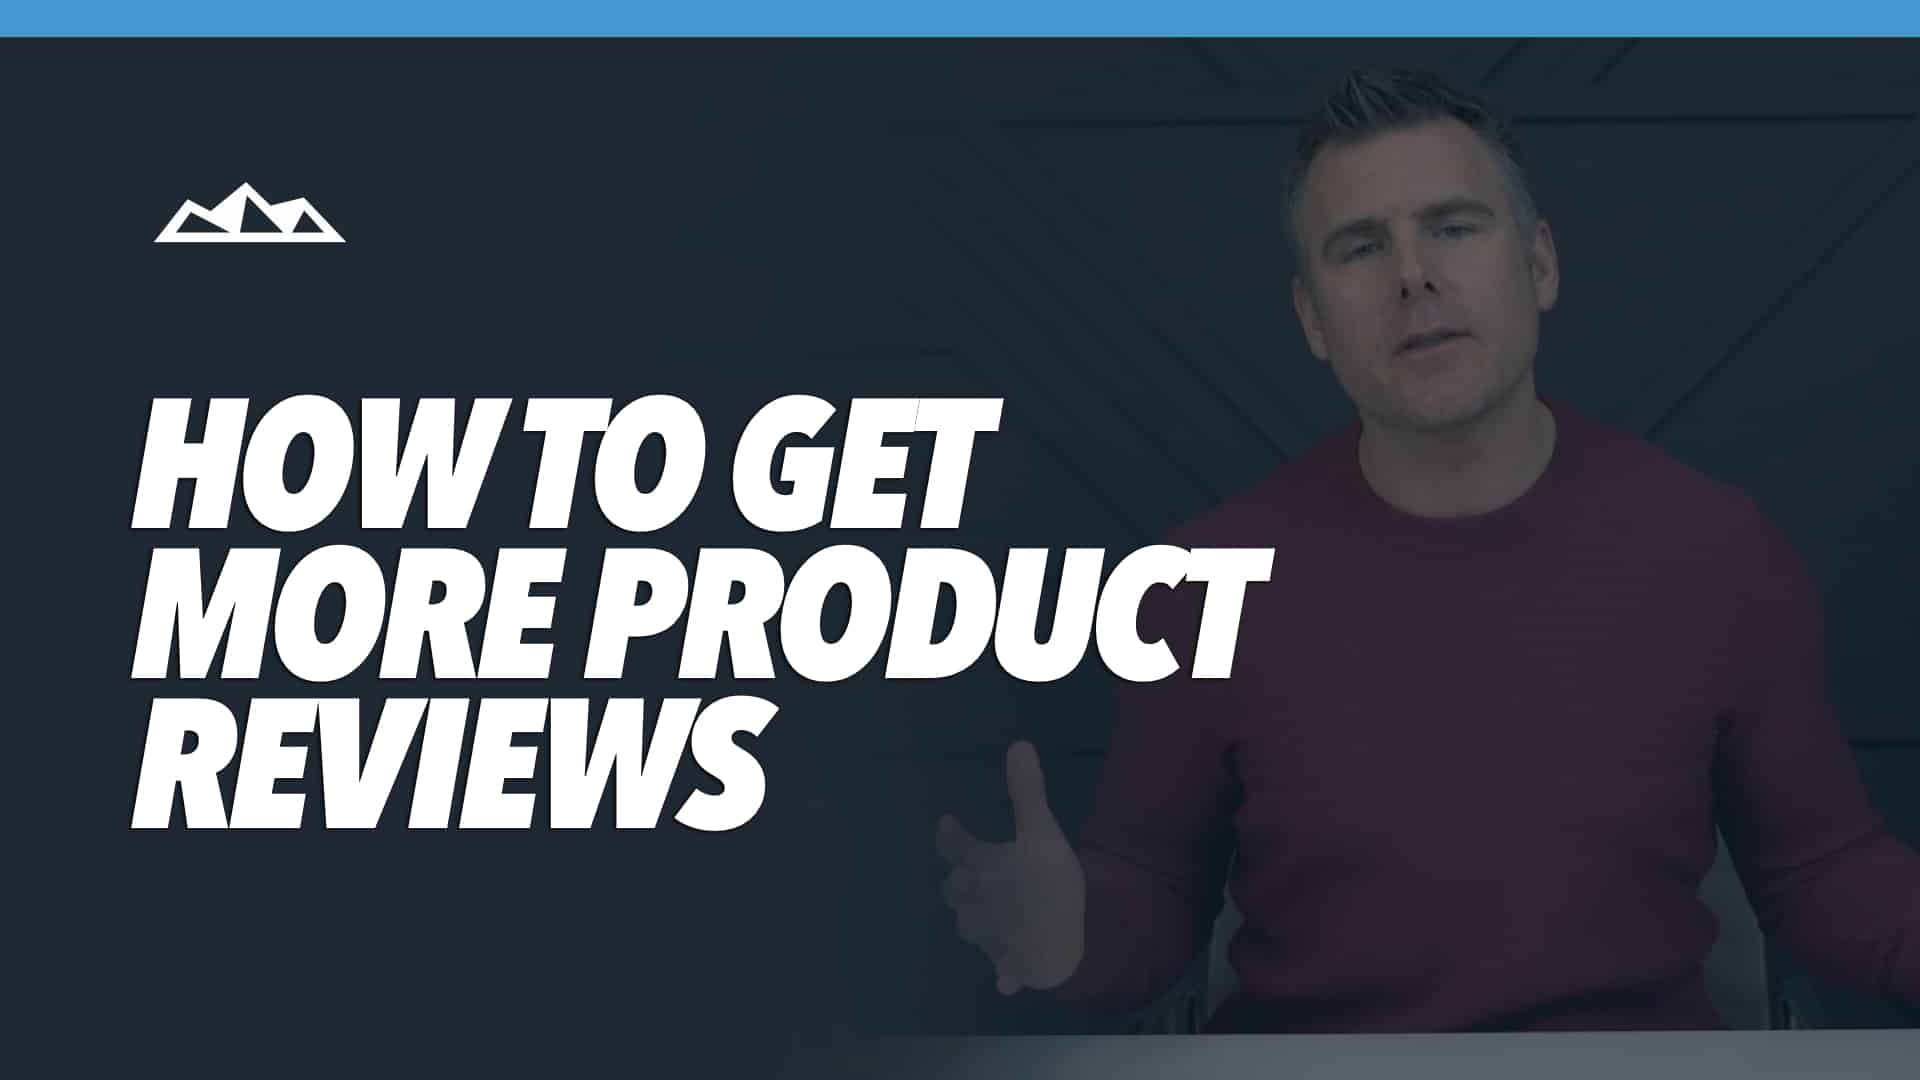 5 Tips to Convince Your Customers to Review Your SaaS Product (and Increase Social Proof)